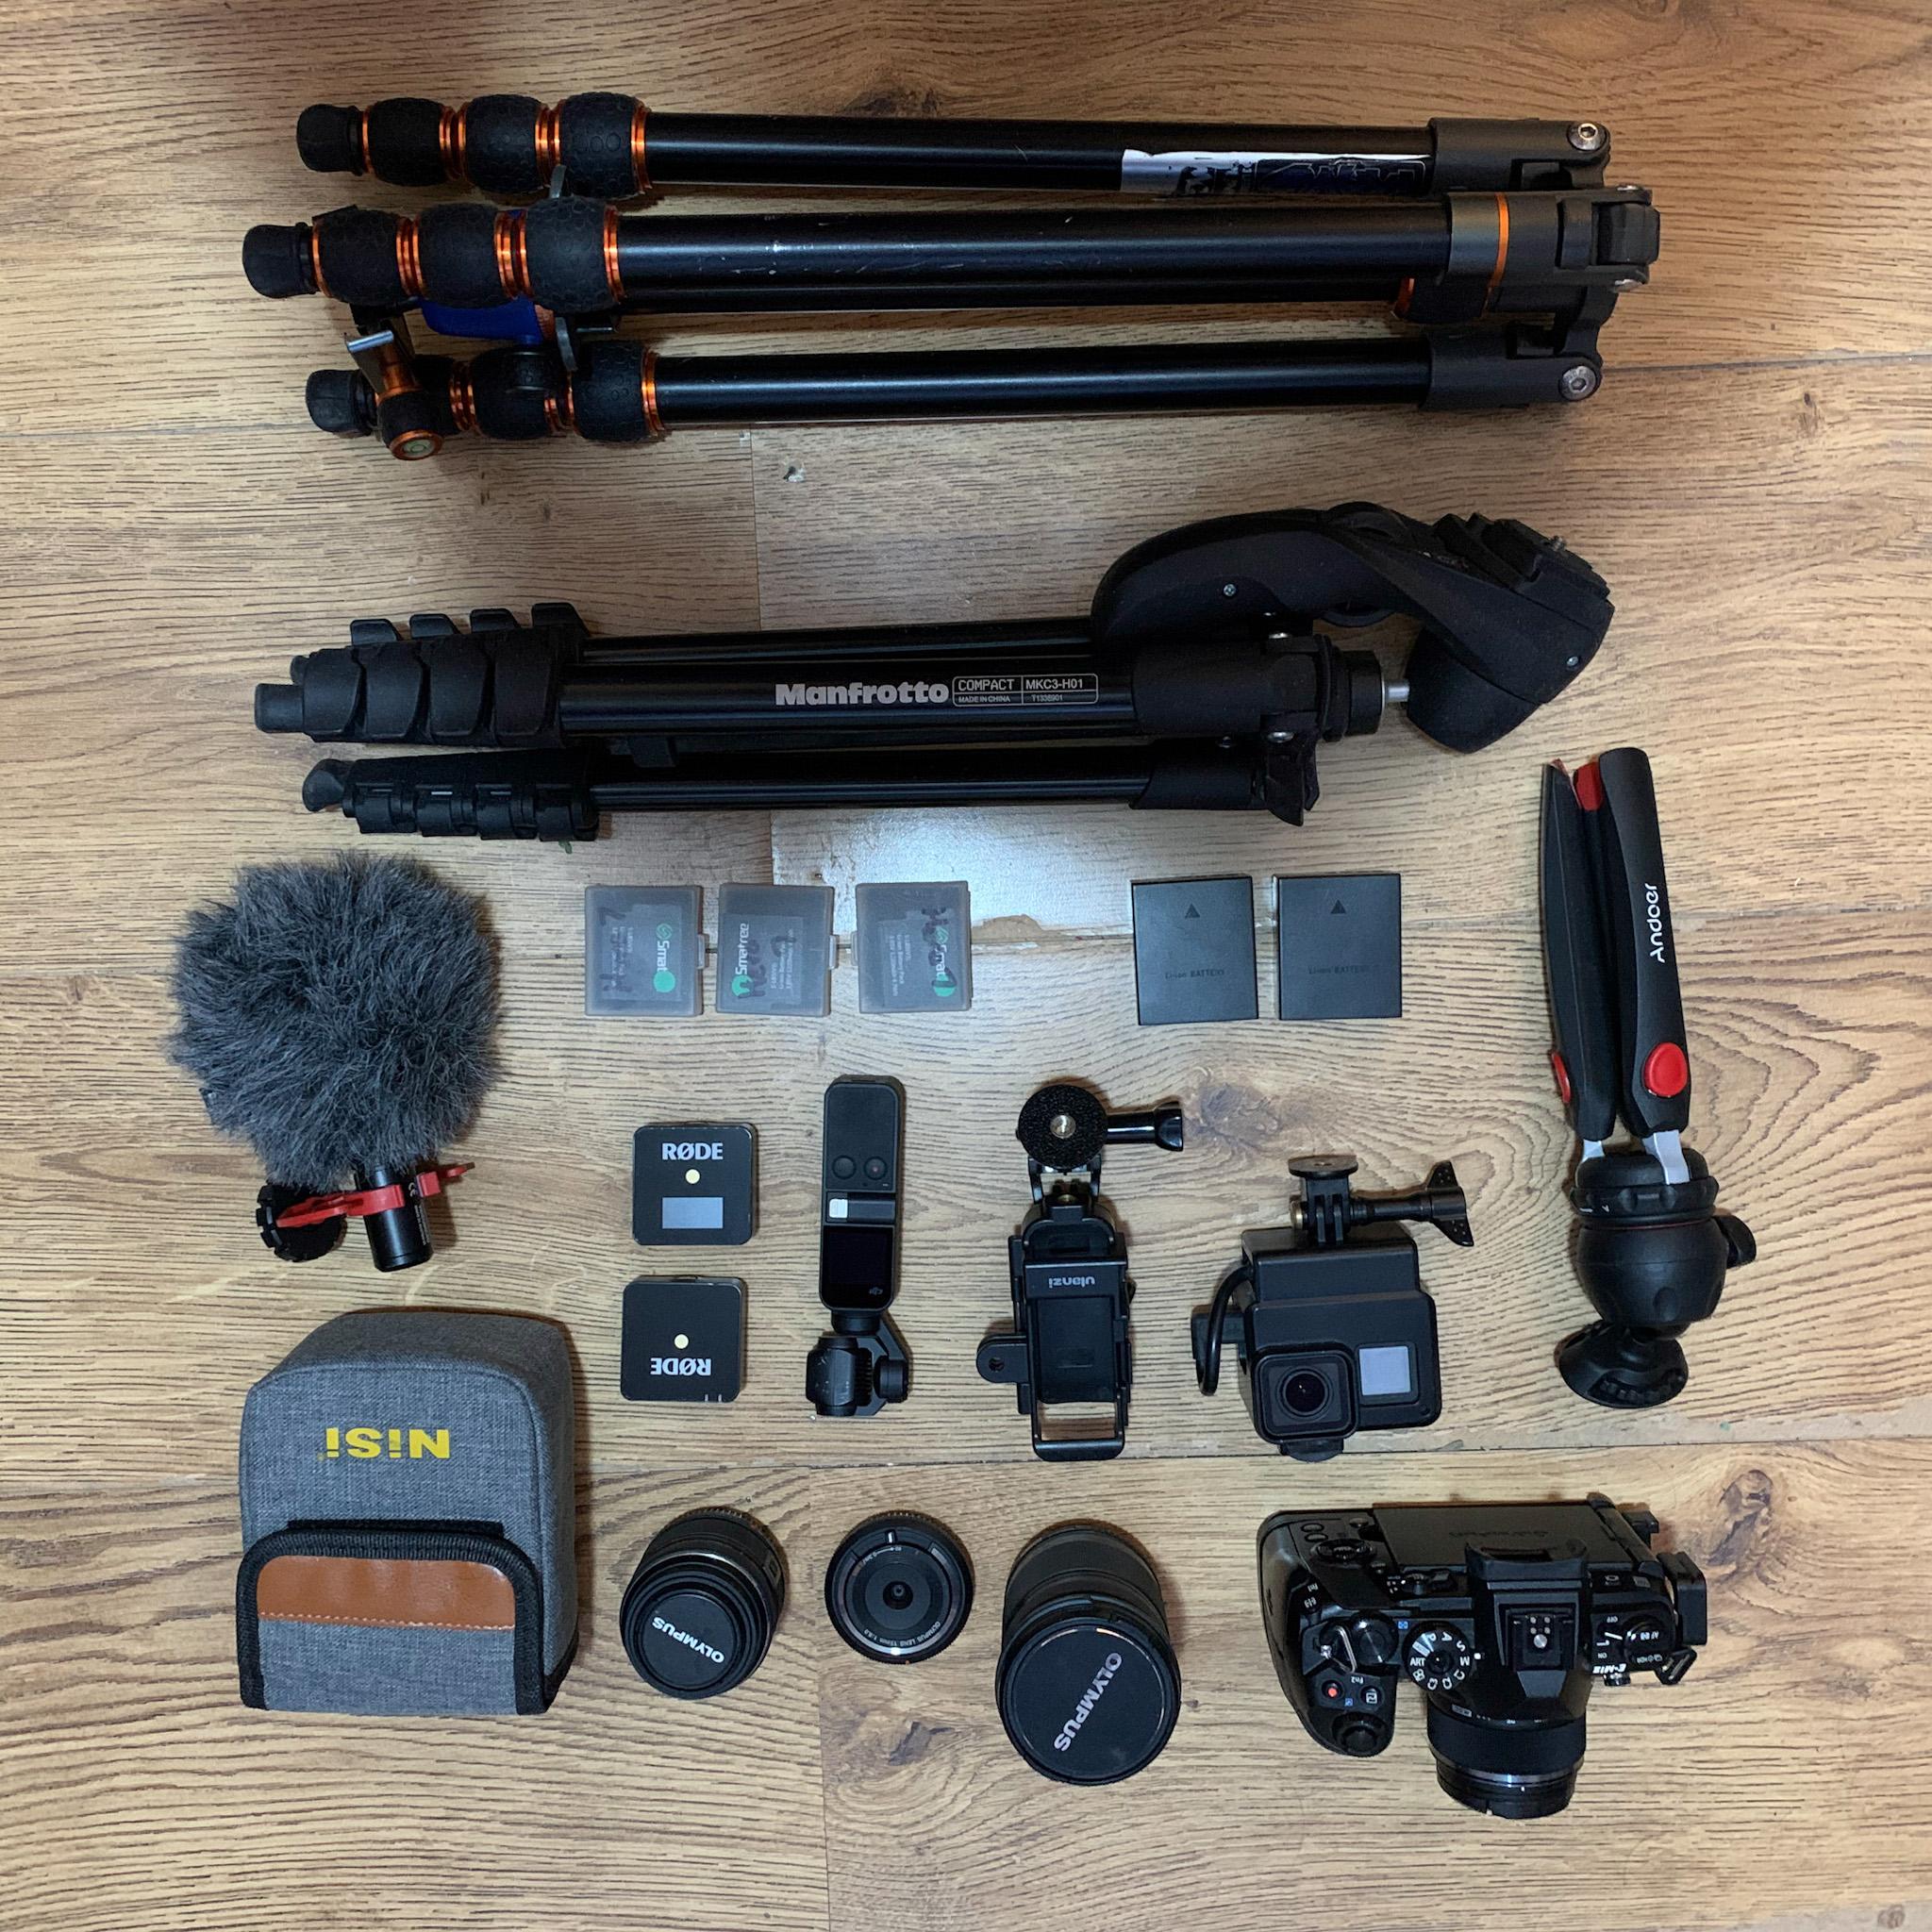 A picture of my camera equipment